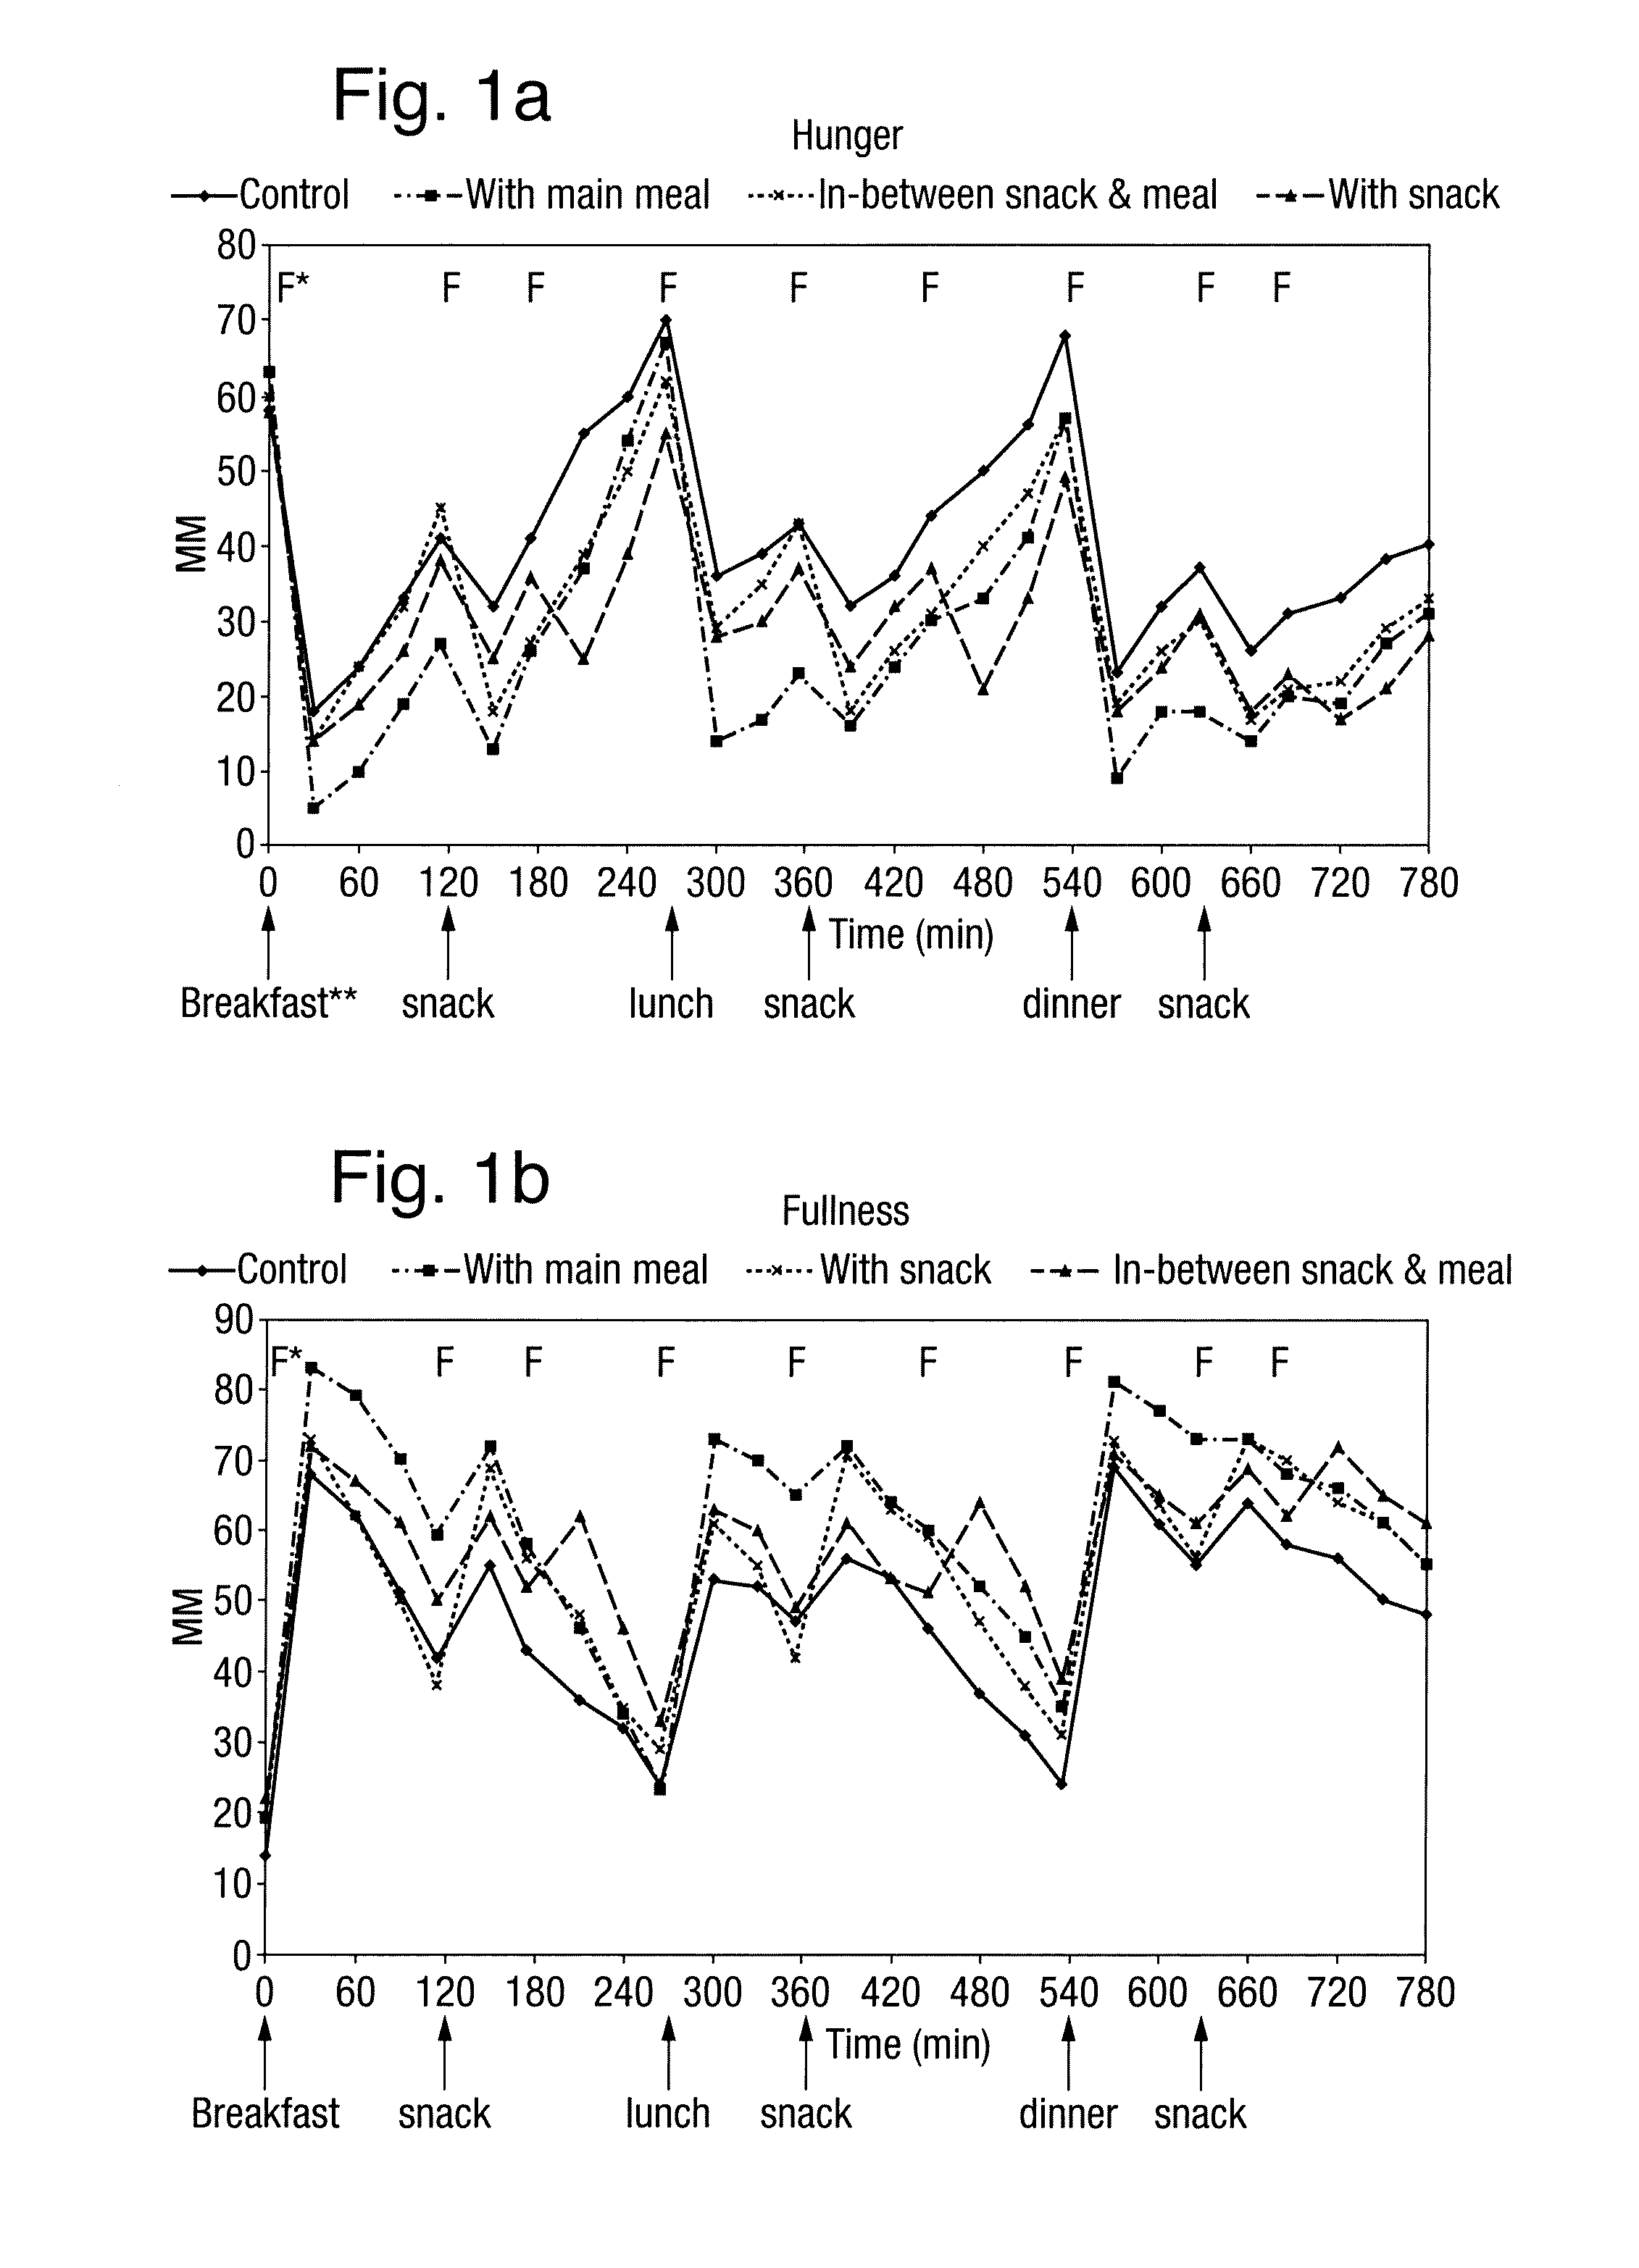 Method for reduction of energy intake by consuming an aerated product at least three times a day